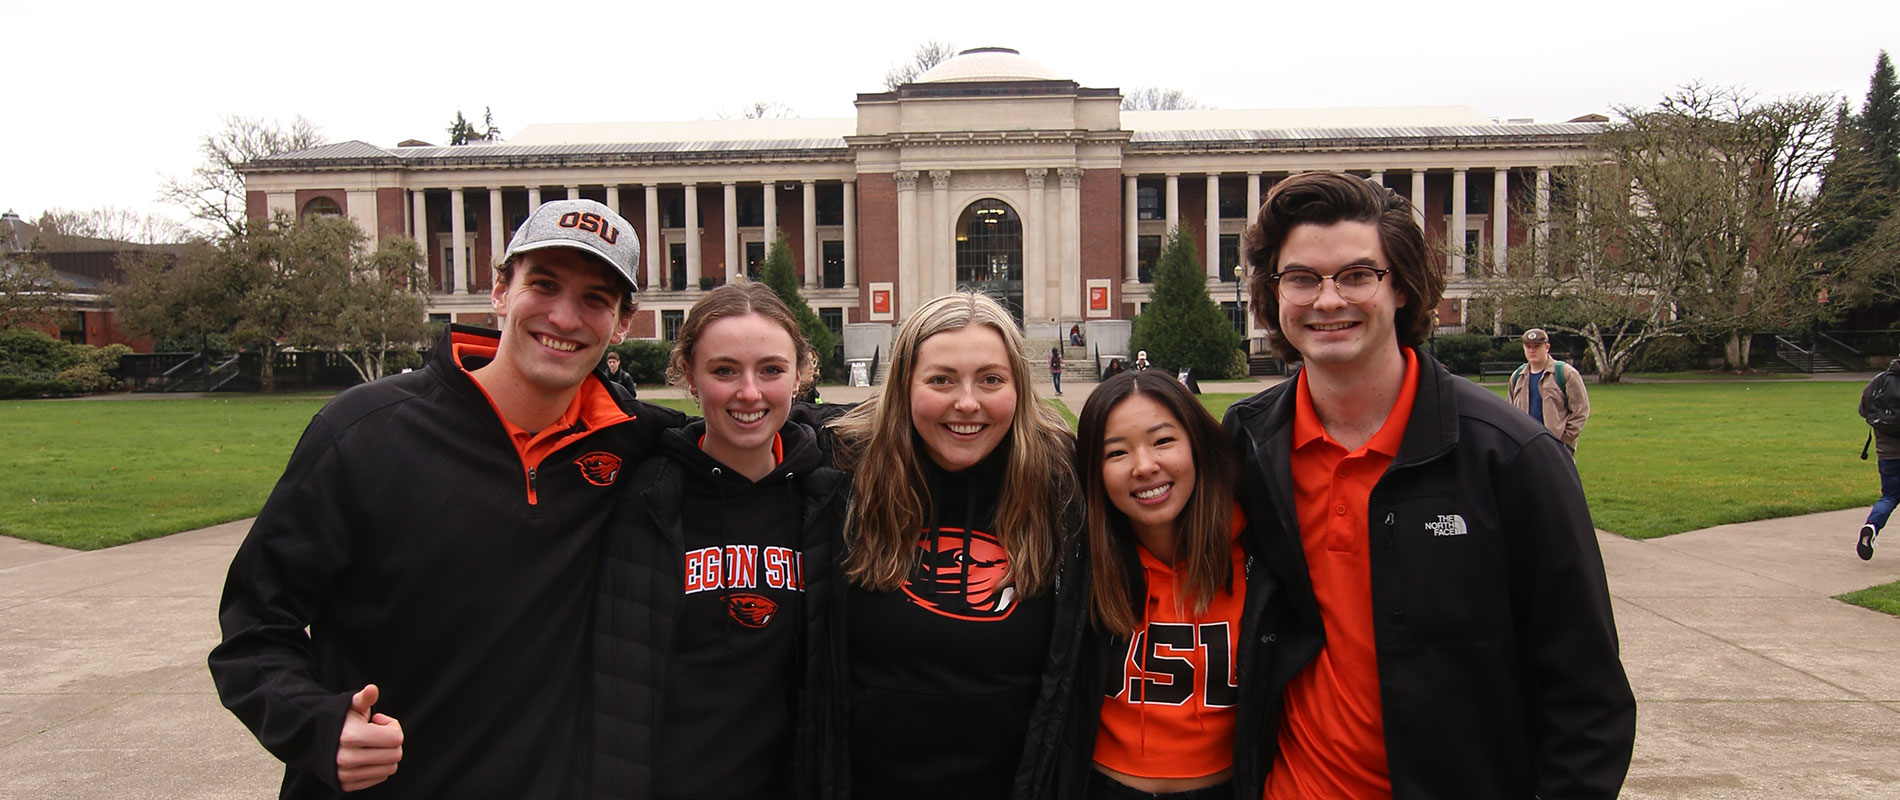 tour students in OSU gear standing in front of the MU